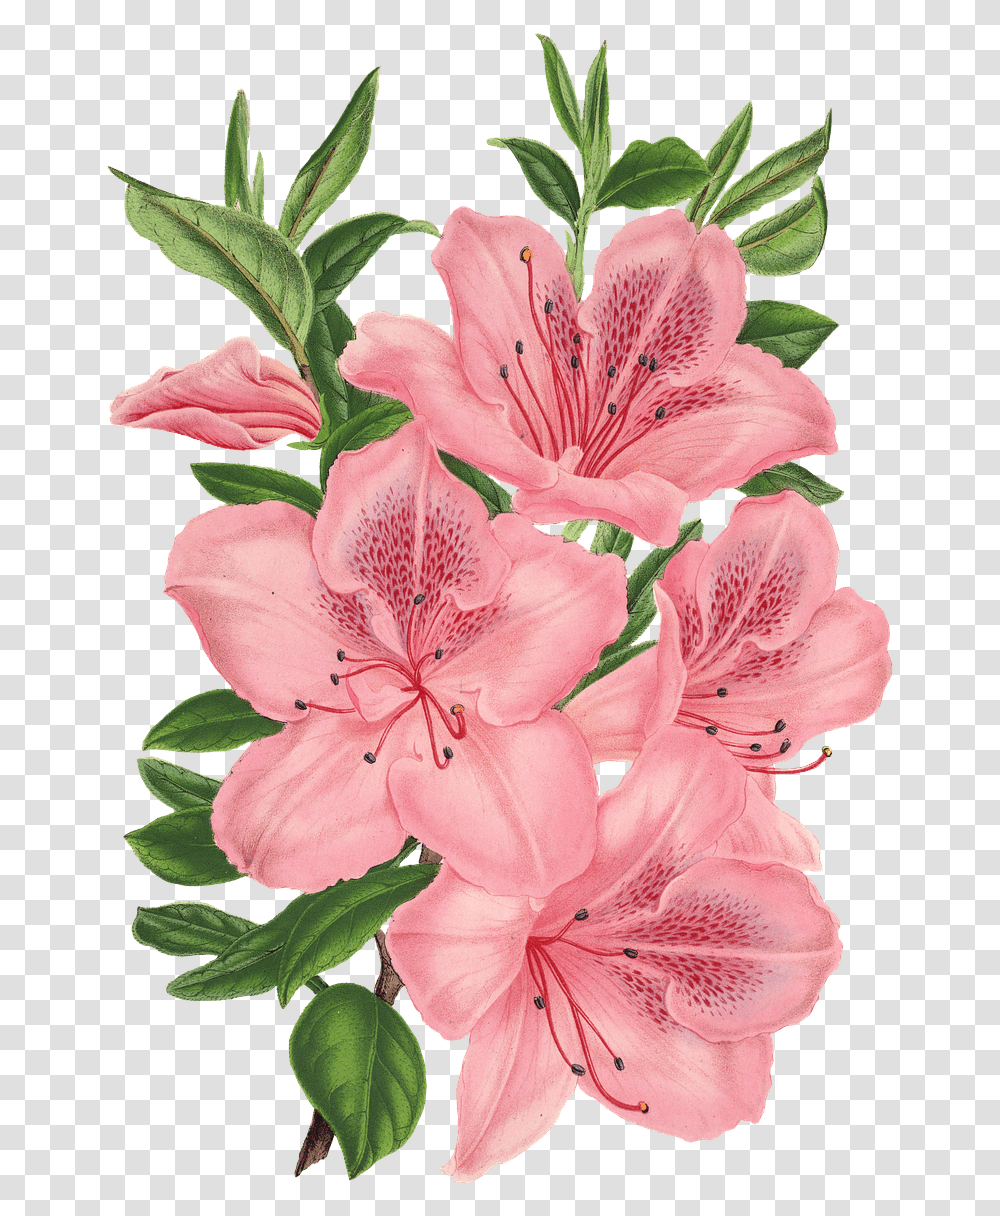 Pink Bunch Of Flowers Drawing Flower Background, Plant, Blossom, Geranium, Amaryllis Transparent Png